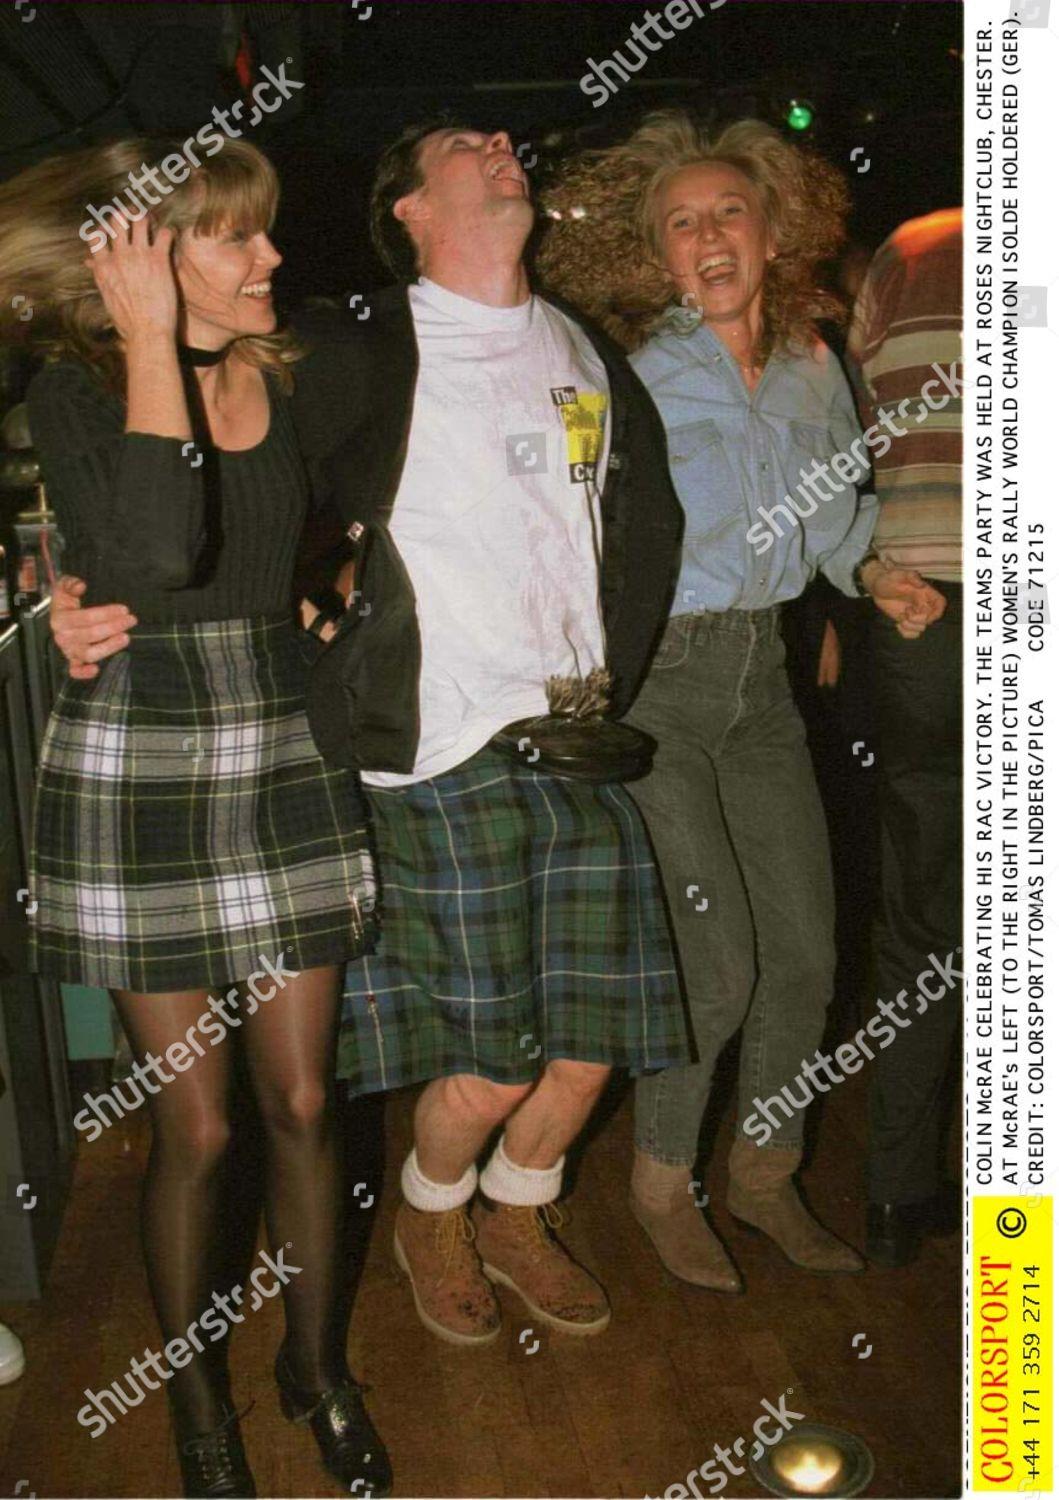 Colin McRae dancing with two female friends.